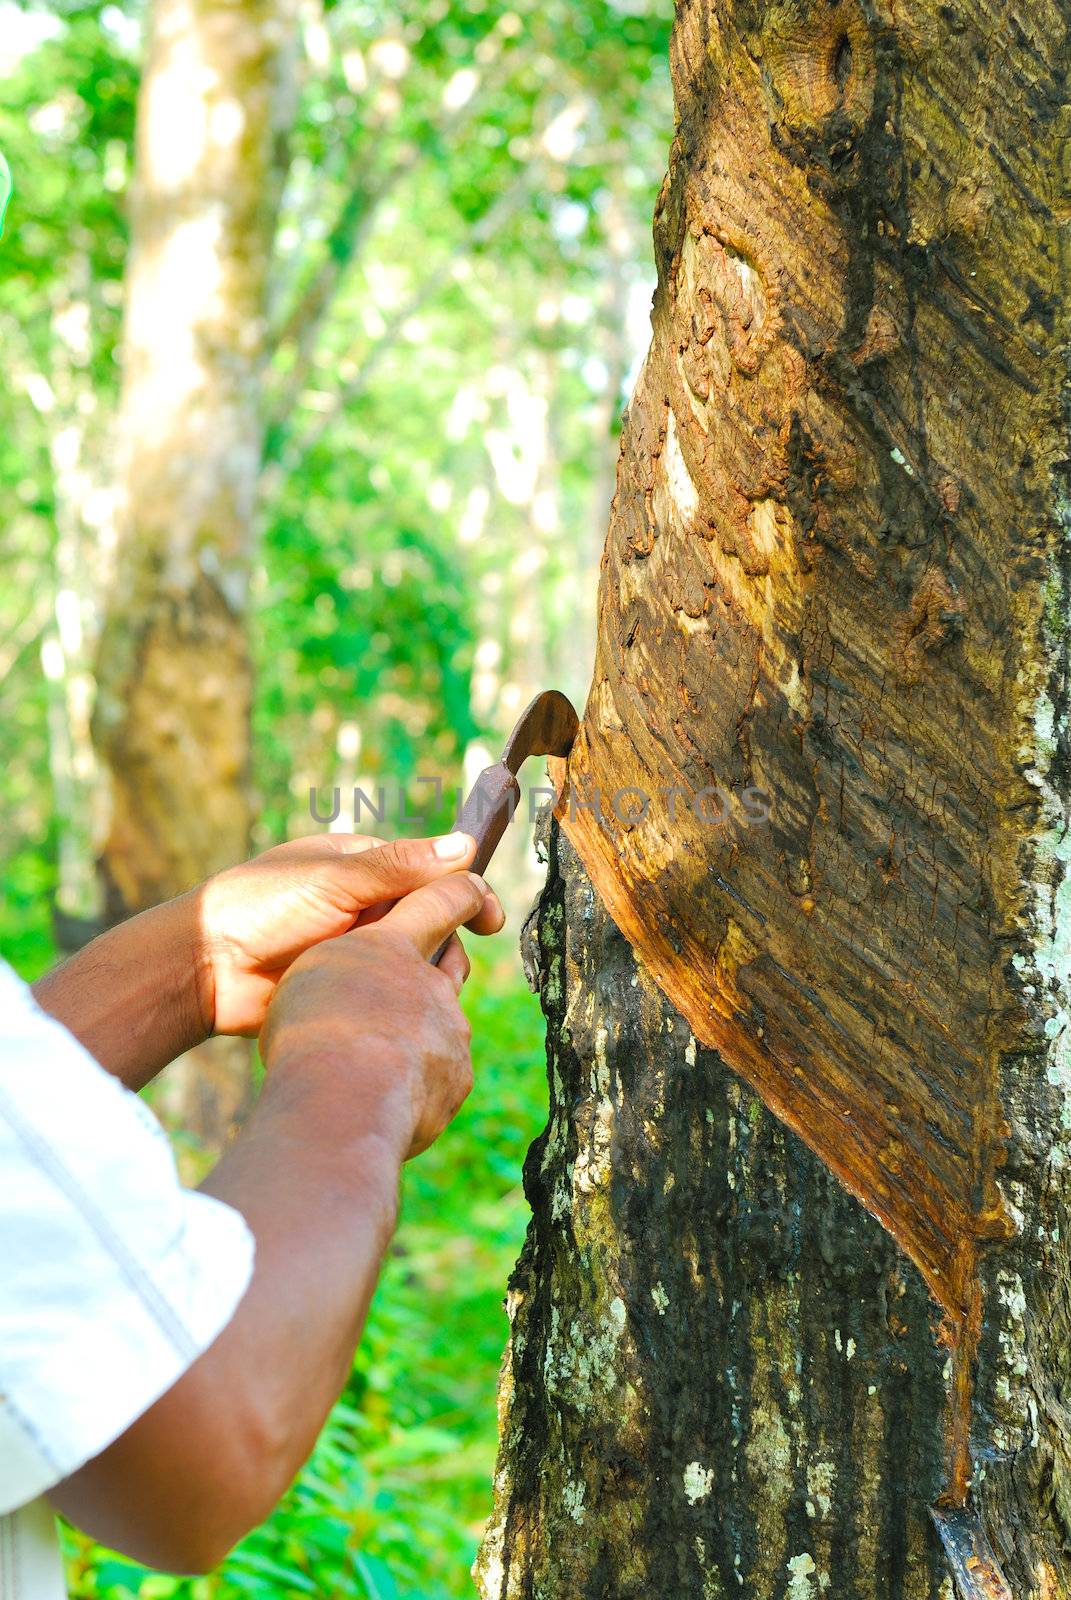 Old rubber tree , rubber and caoutchouc , rubber tapping